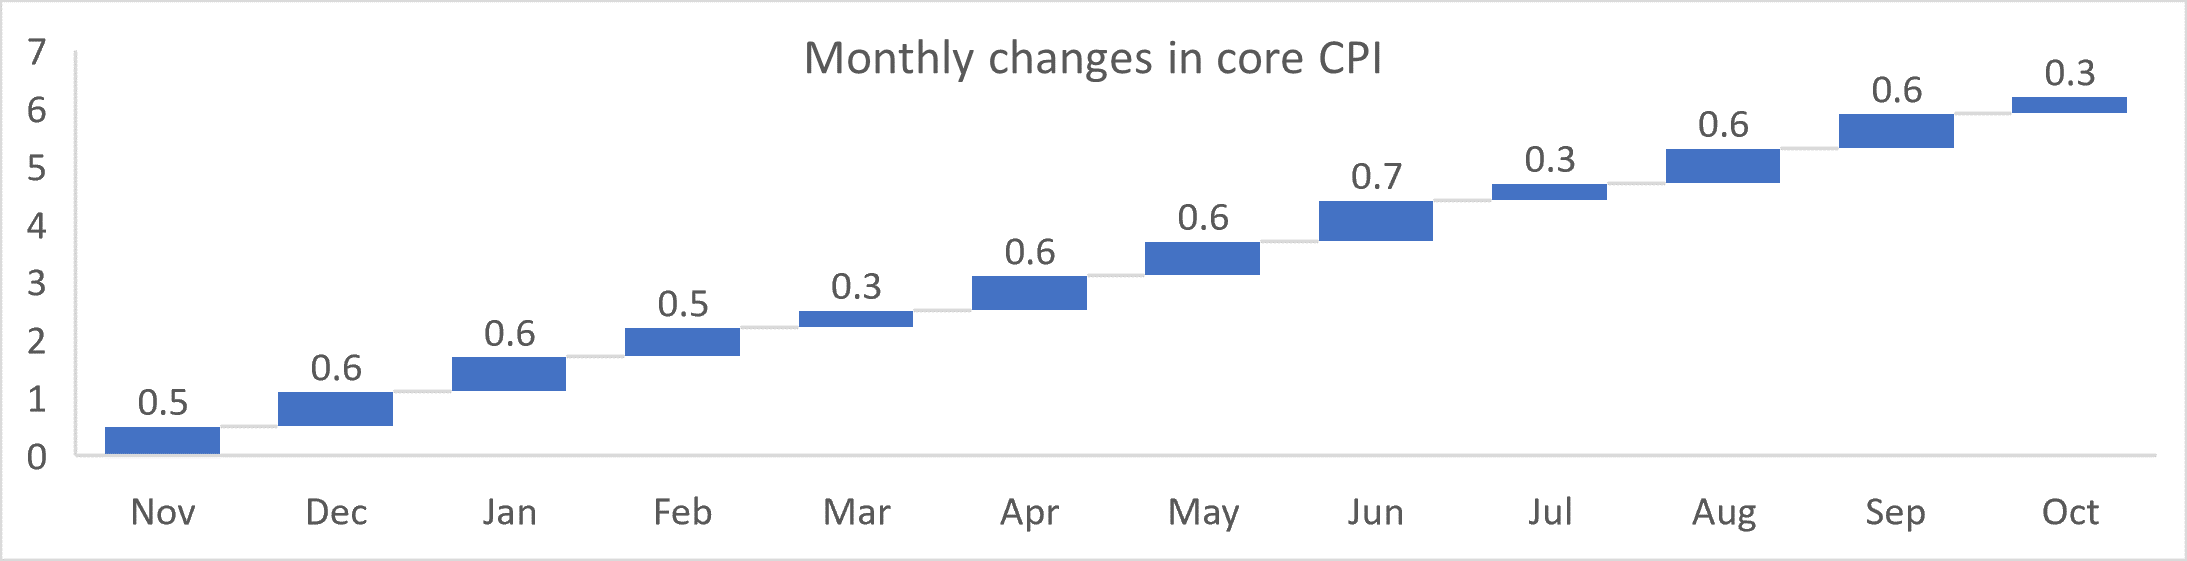 Monthly changes in core CPI: (Source: Macroscope)